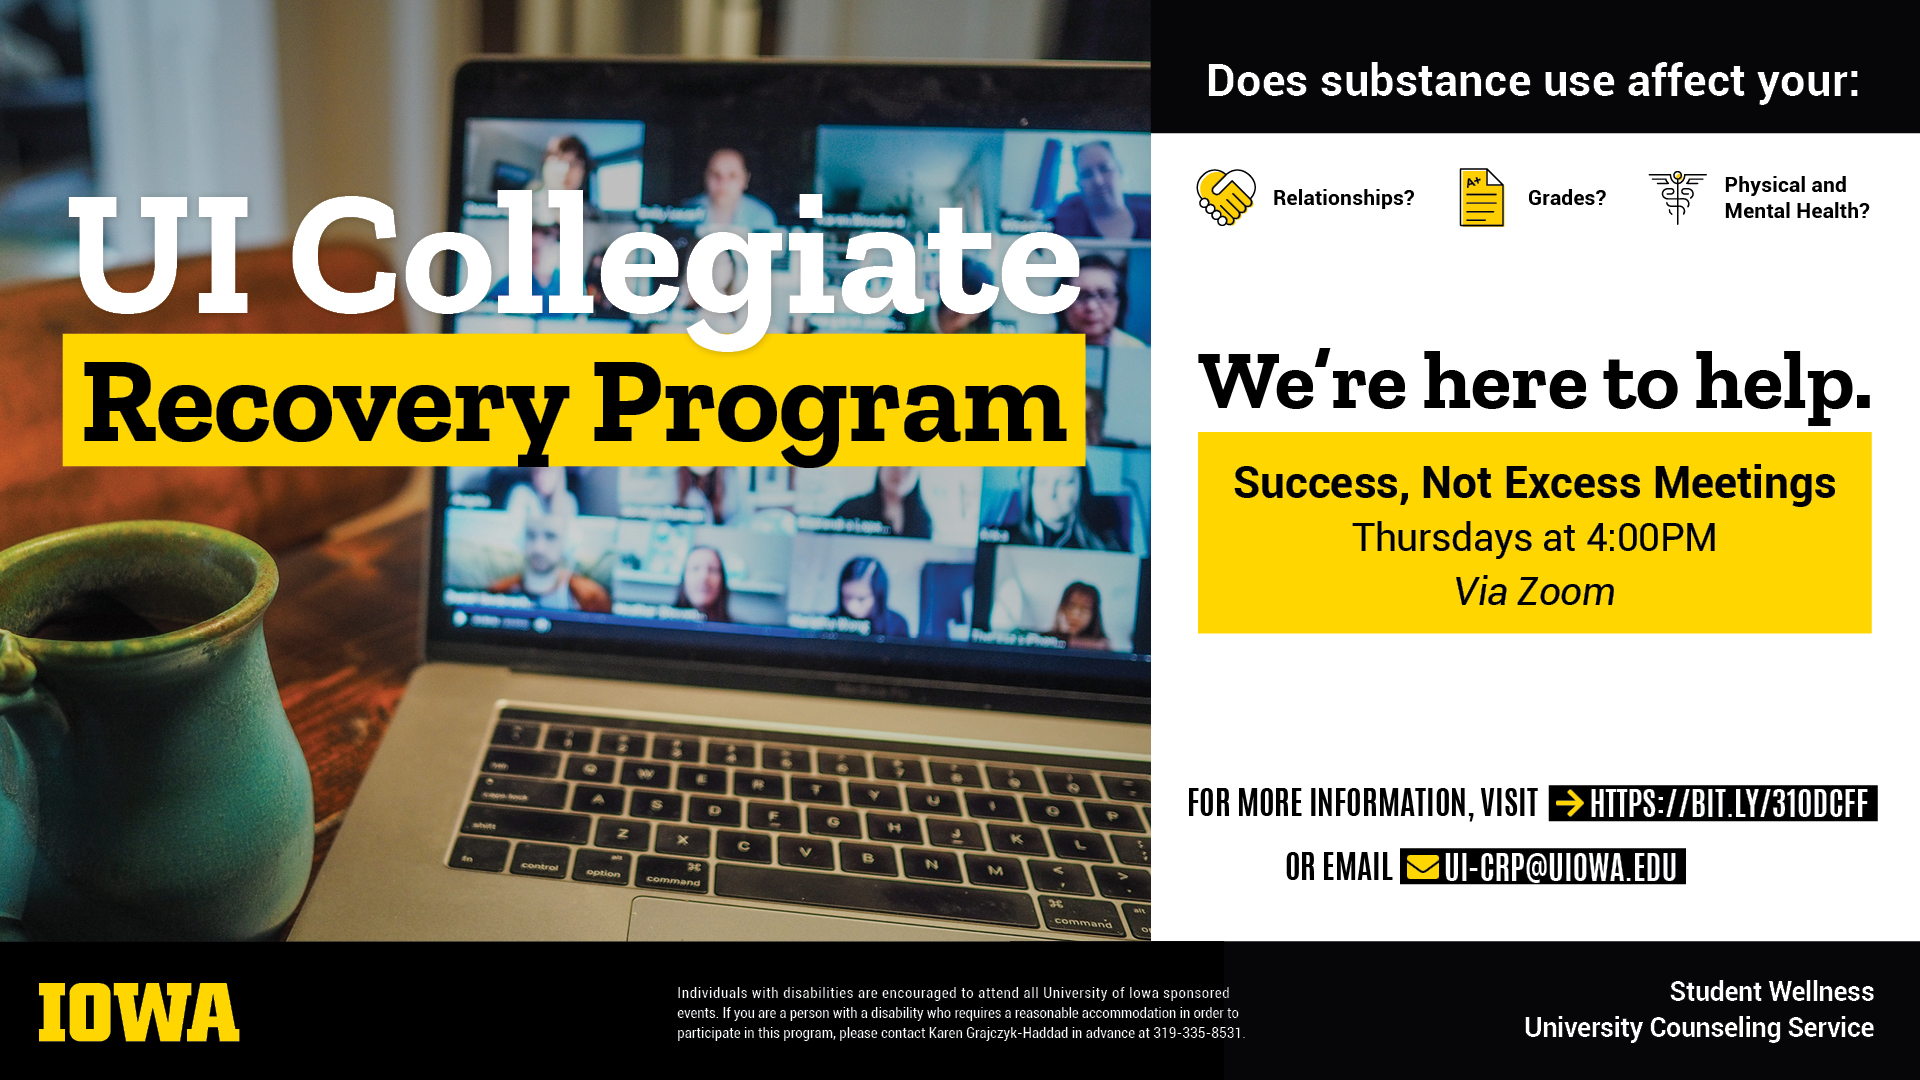 UI Collegiate Recovery Program. Does substance abuse affect your grade? relationships? physical and mental health? We're here to help. Success, Not Excess Meetings. Thursdays at 4:00 PM via Zoom. For more information, visit https://bit.ly/310DCFF or email UI-CRP@uiowa.edu.